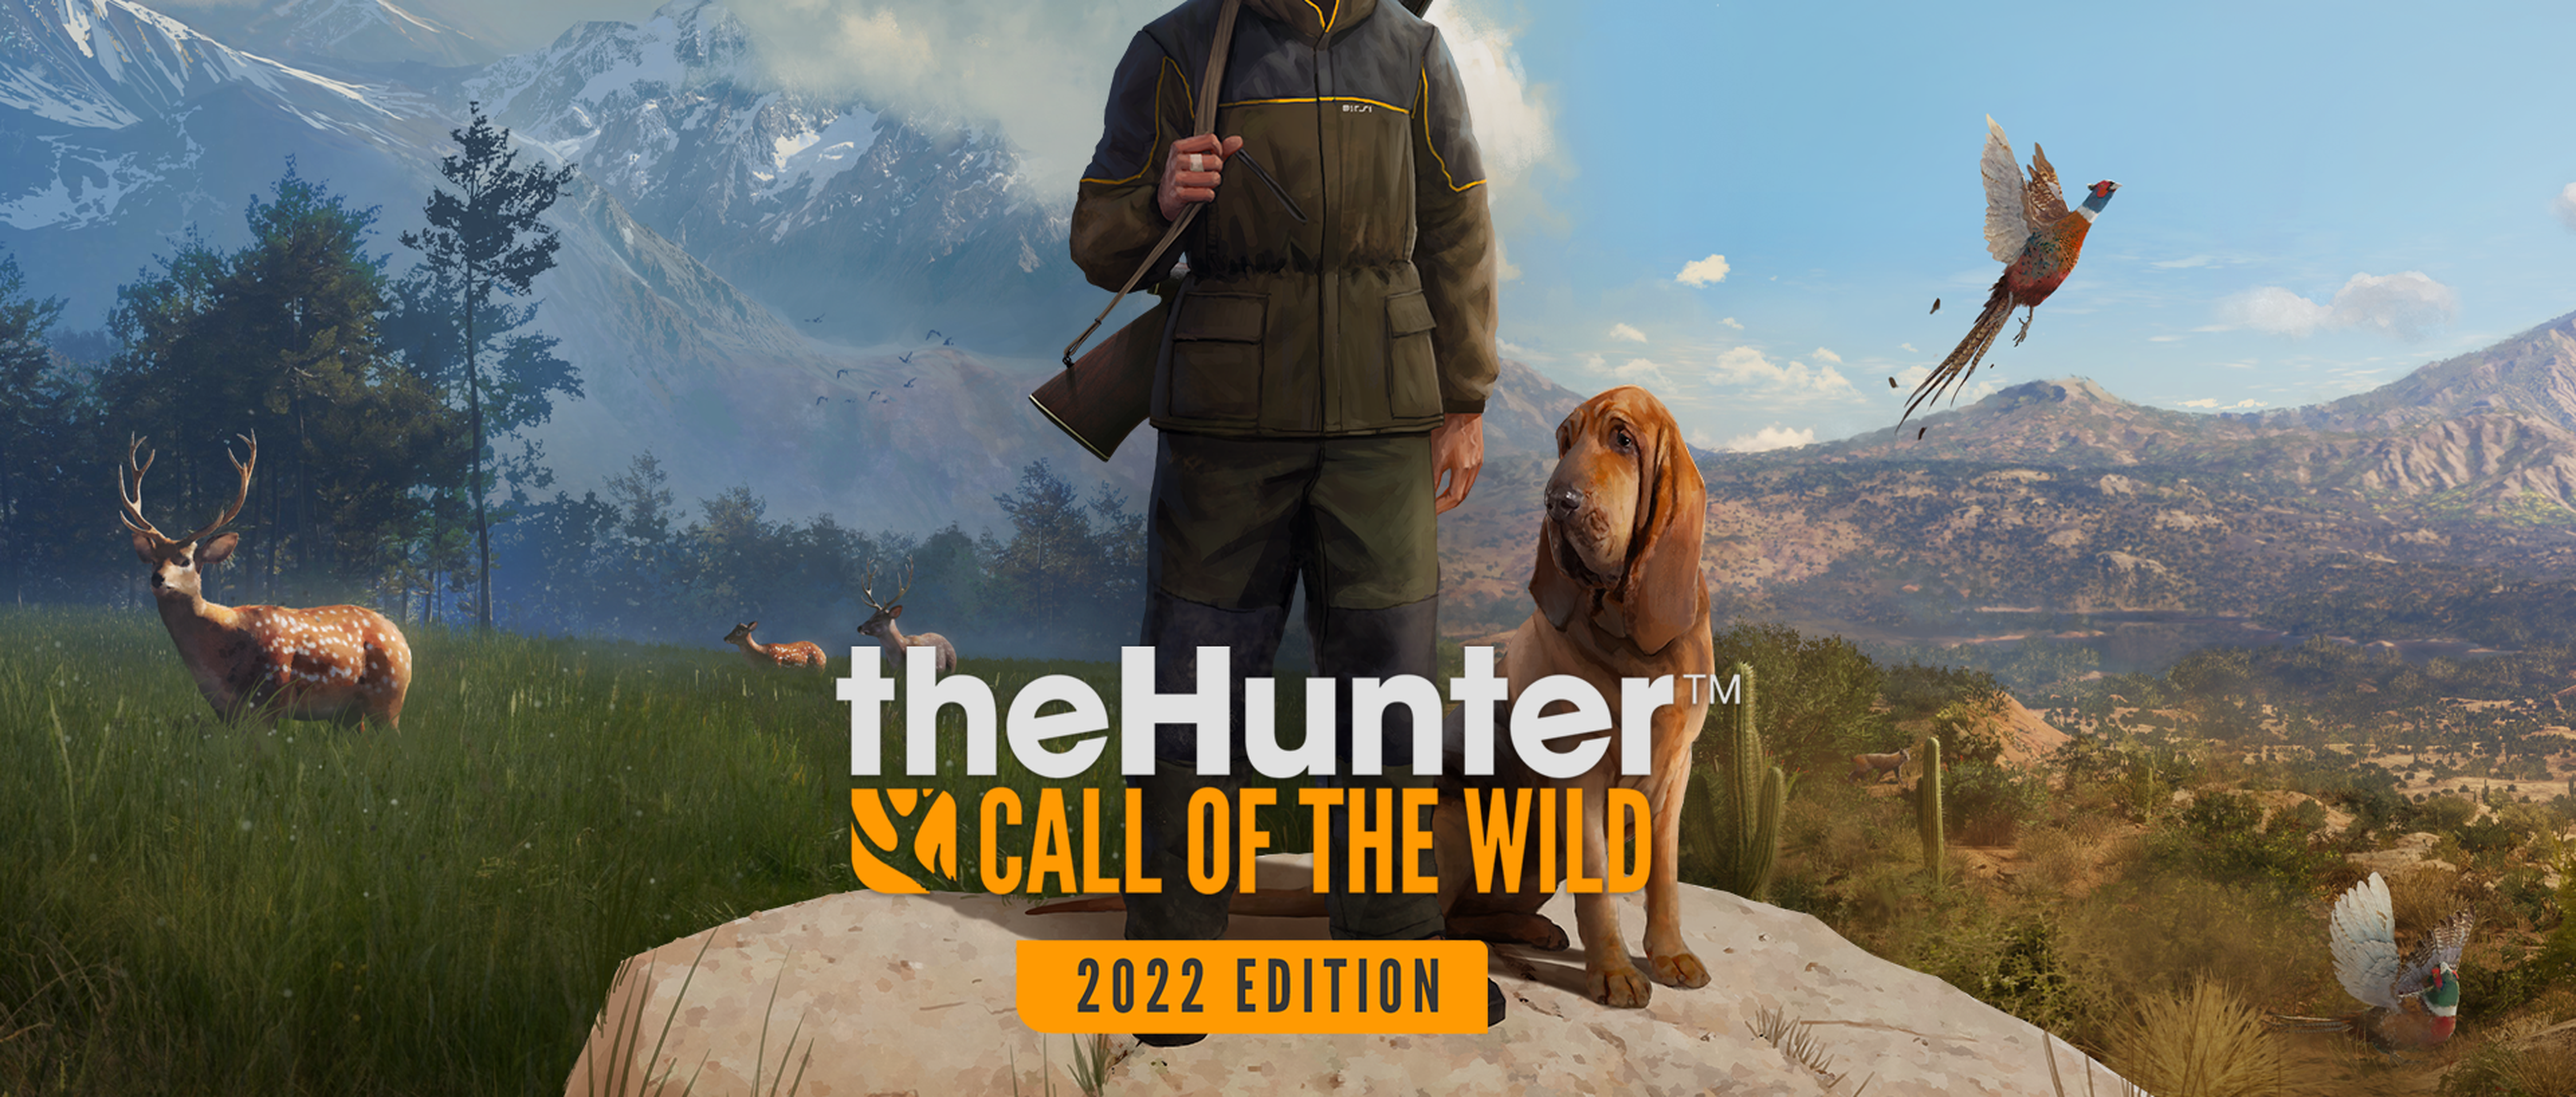 the hunter call of the wild weapons